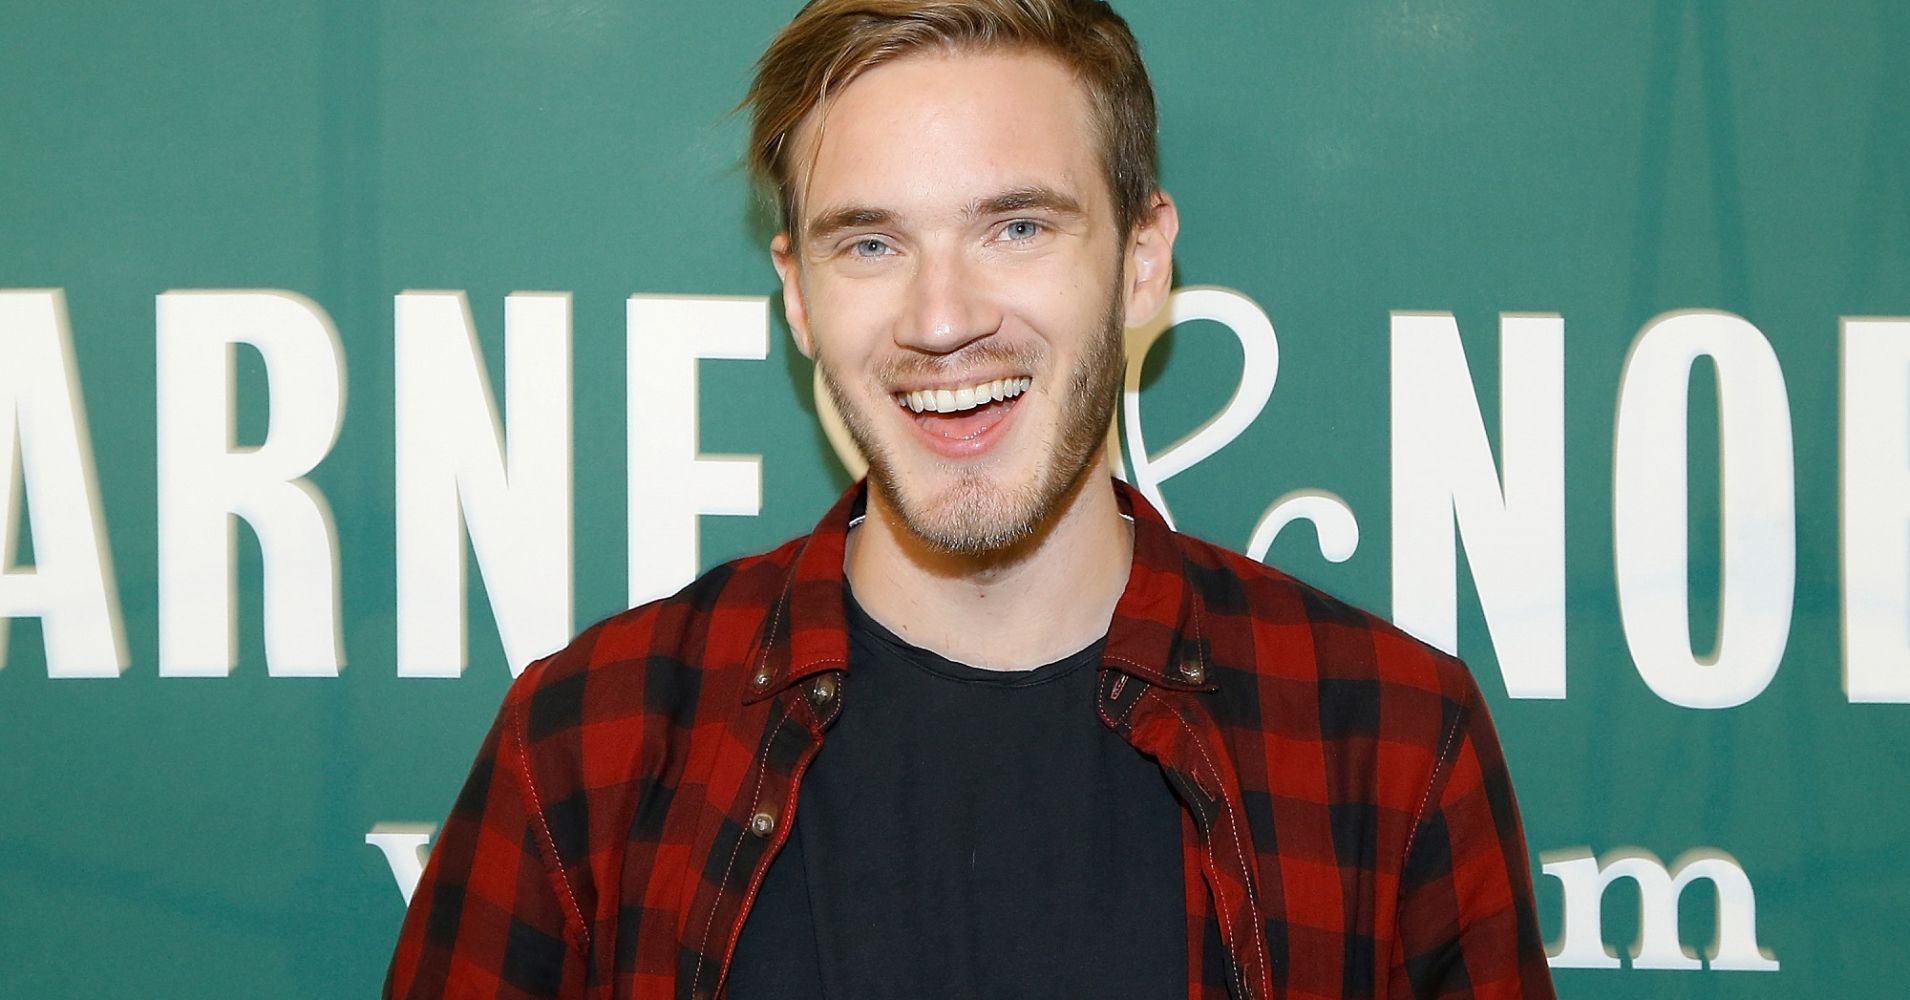 Pewdiepie And T-Series Both Cross 86 Million Subscribers Base On YouTube